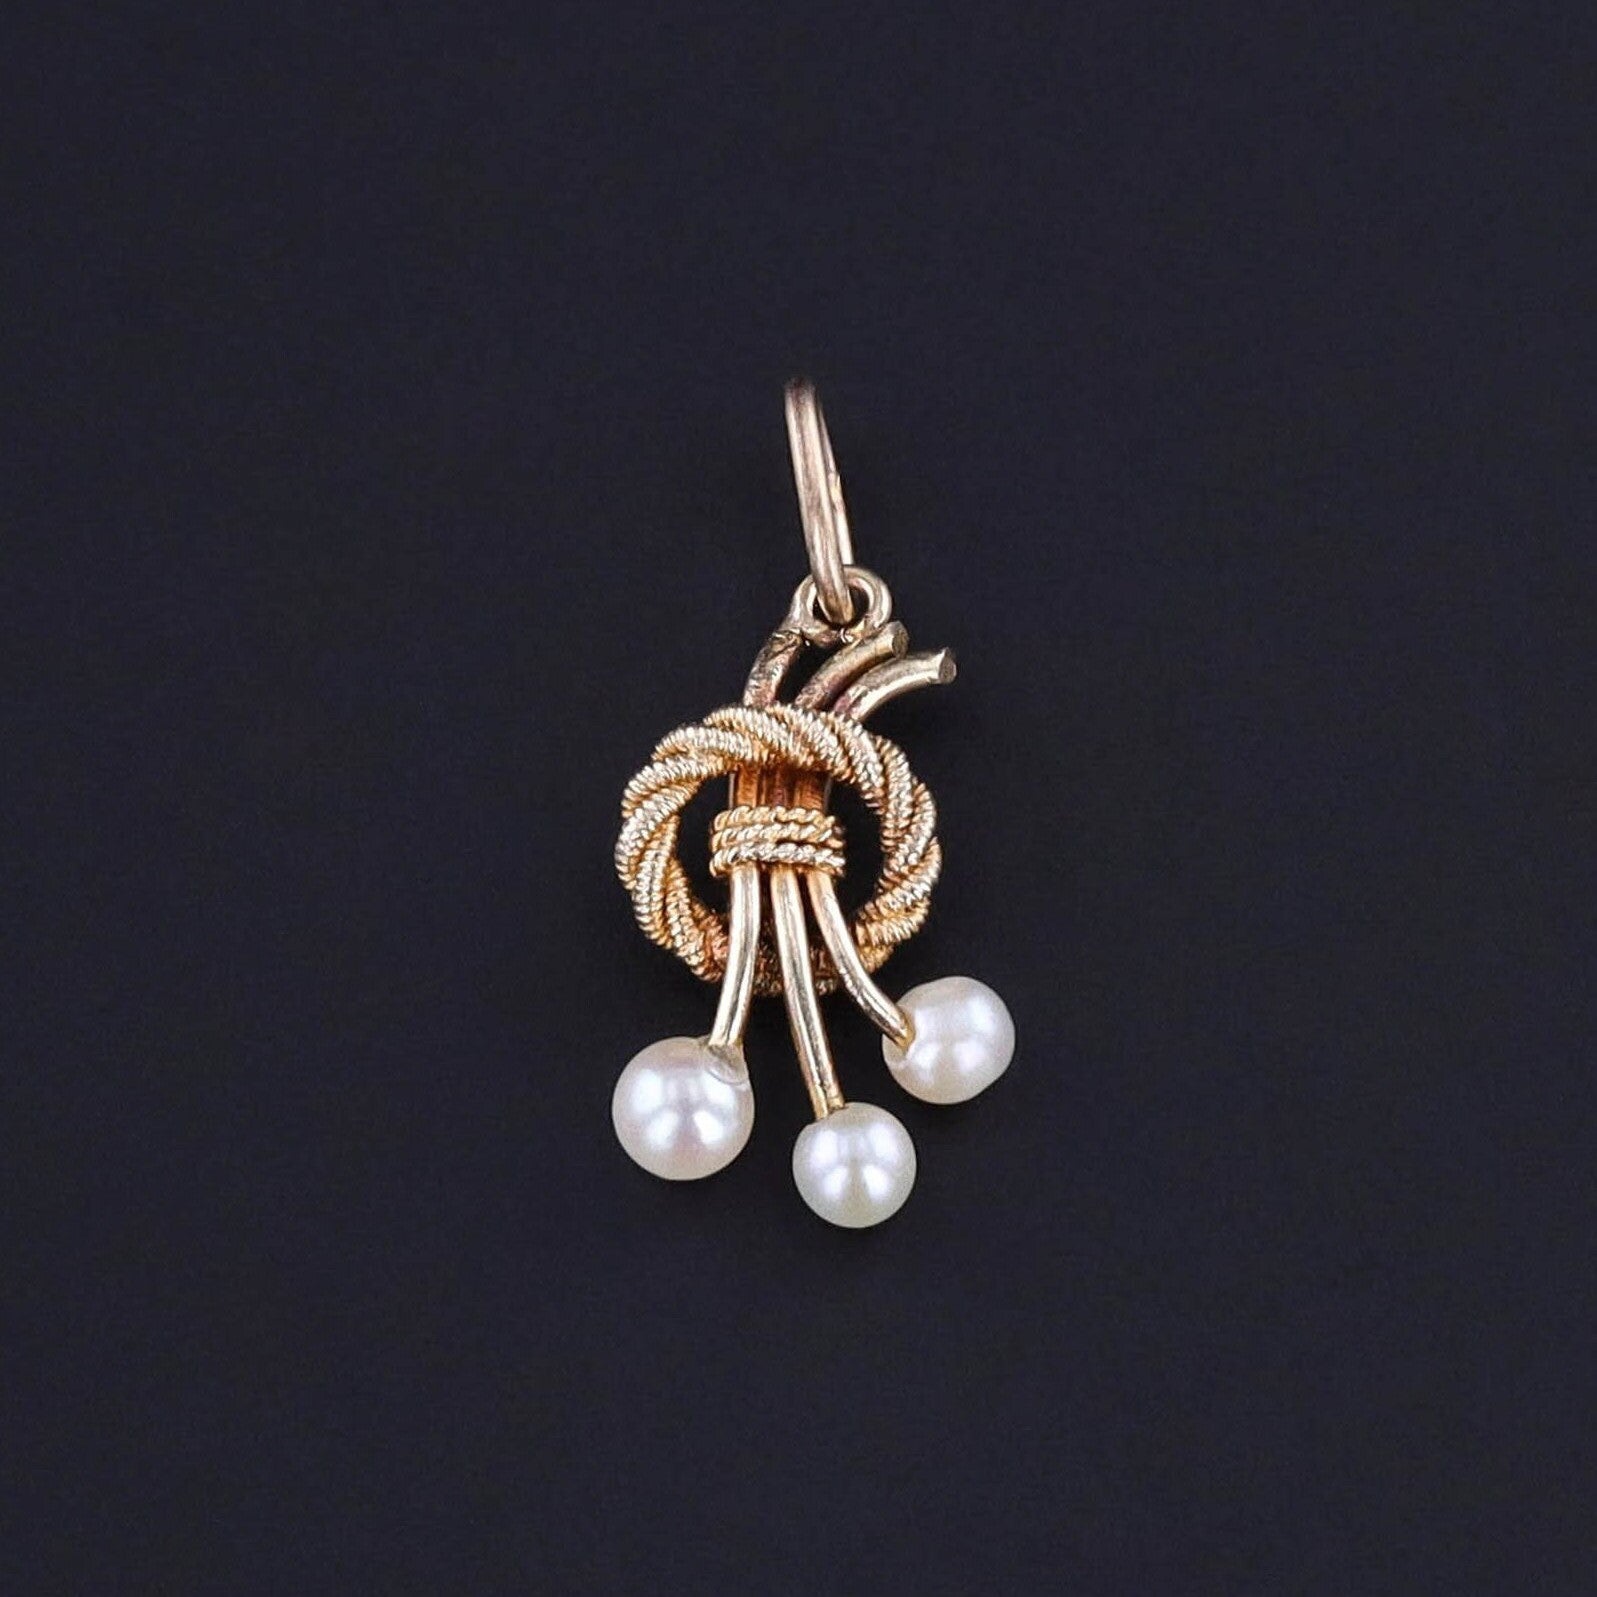 Antique Pearl Charm of 14k Gold